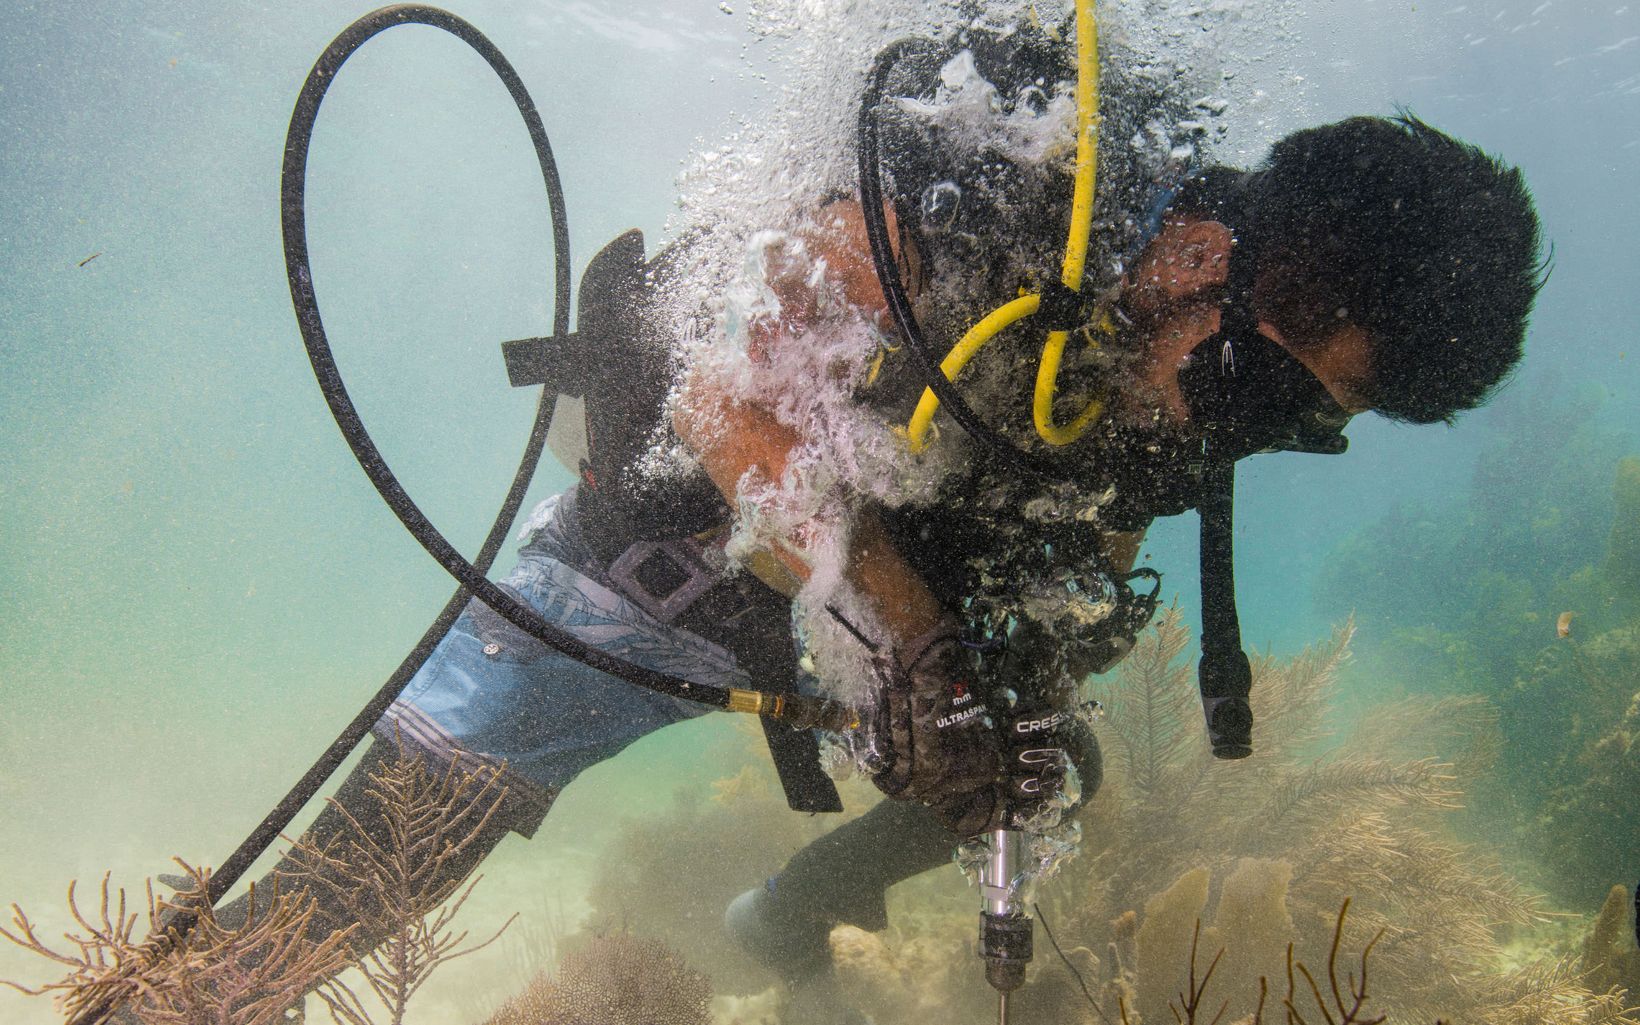 Underwater drill training A brigade member learns to use a drill underwater during the second day of coral reef rapid-response training for natural disasters. Following a hurricane, these brigade members would use drills to secure corals to the reef to prepare for repairing reefs following hurricanes. In the Mesoamerican Barrier Reef at Puerto Morelos National Marine Park. Puerto Morelos, Mexico. June 2018.   © Jennifer Adler